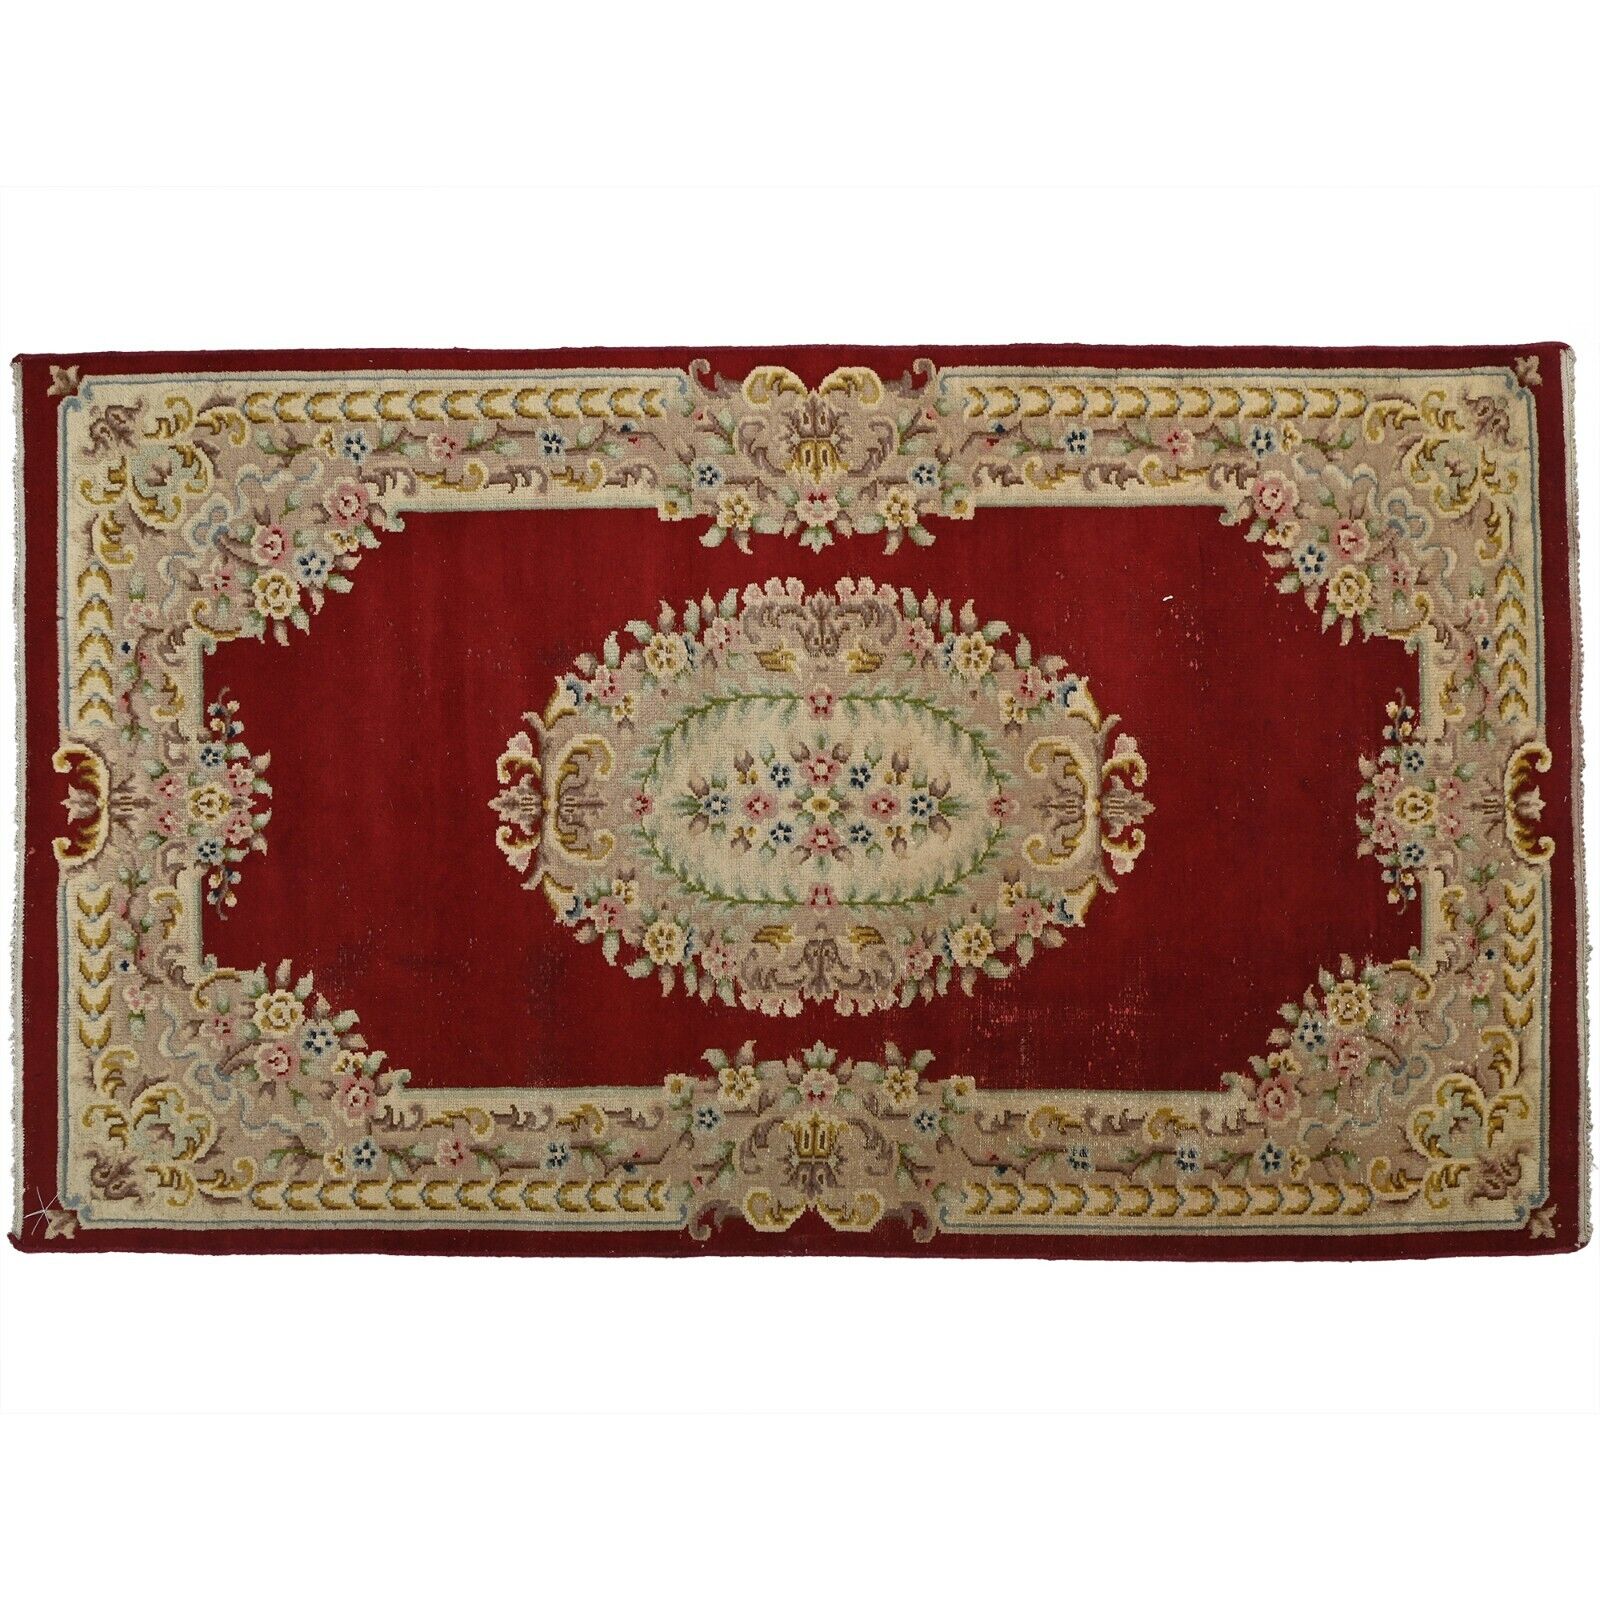 70 Year old French Aubosone design Mirzapur carpet 4 X 7 ft, Hand knotted runner